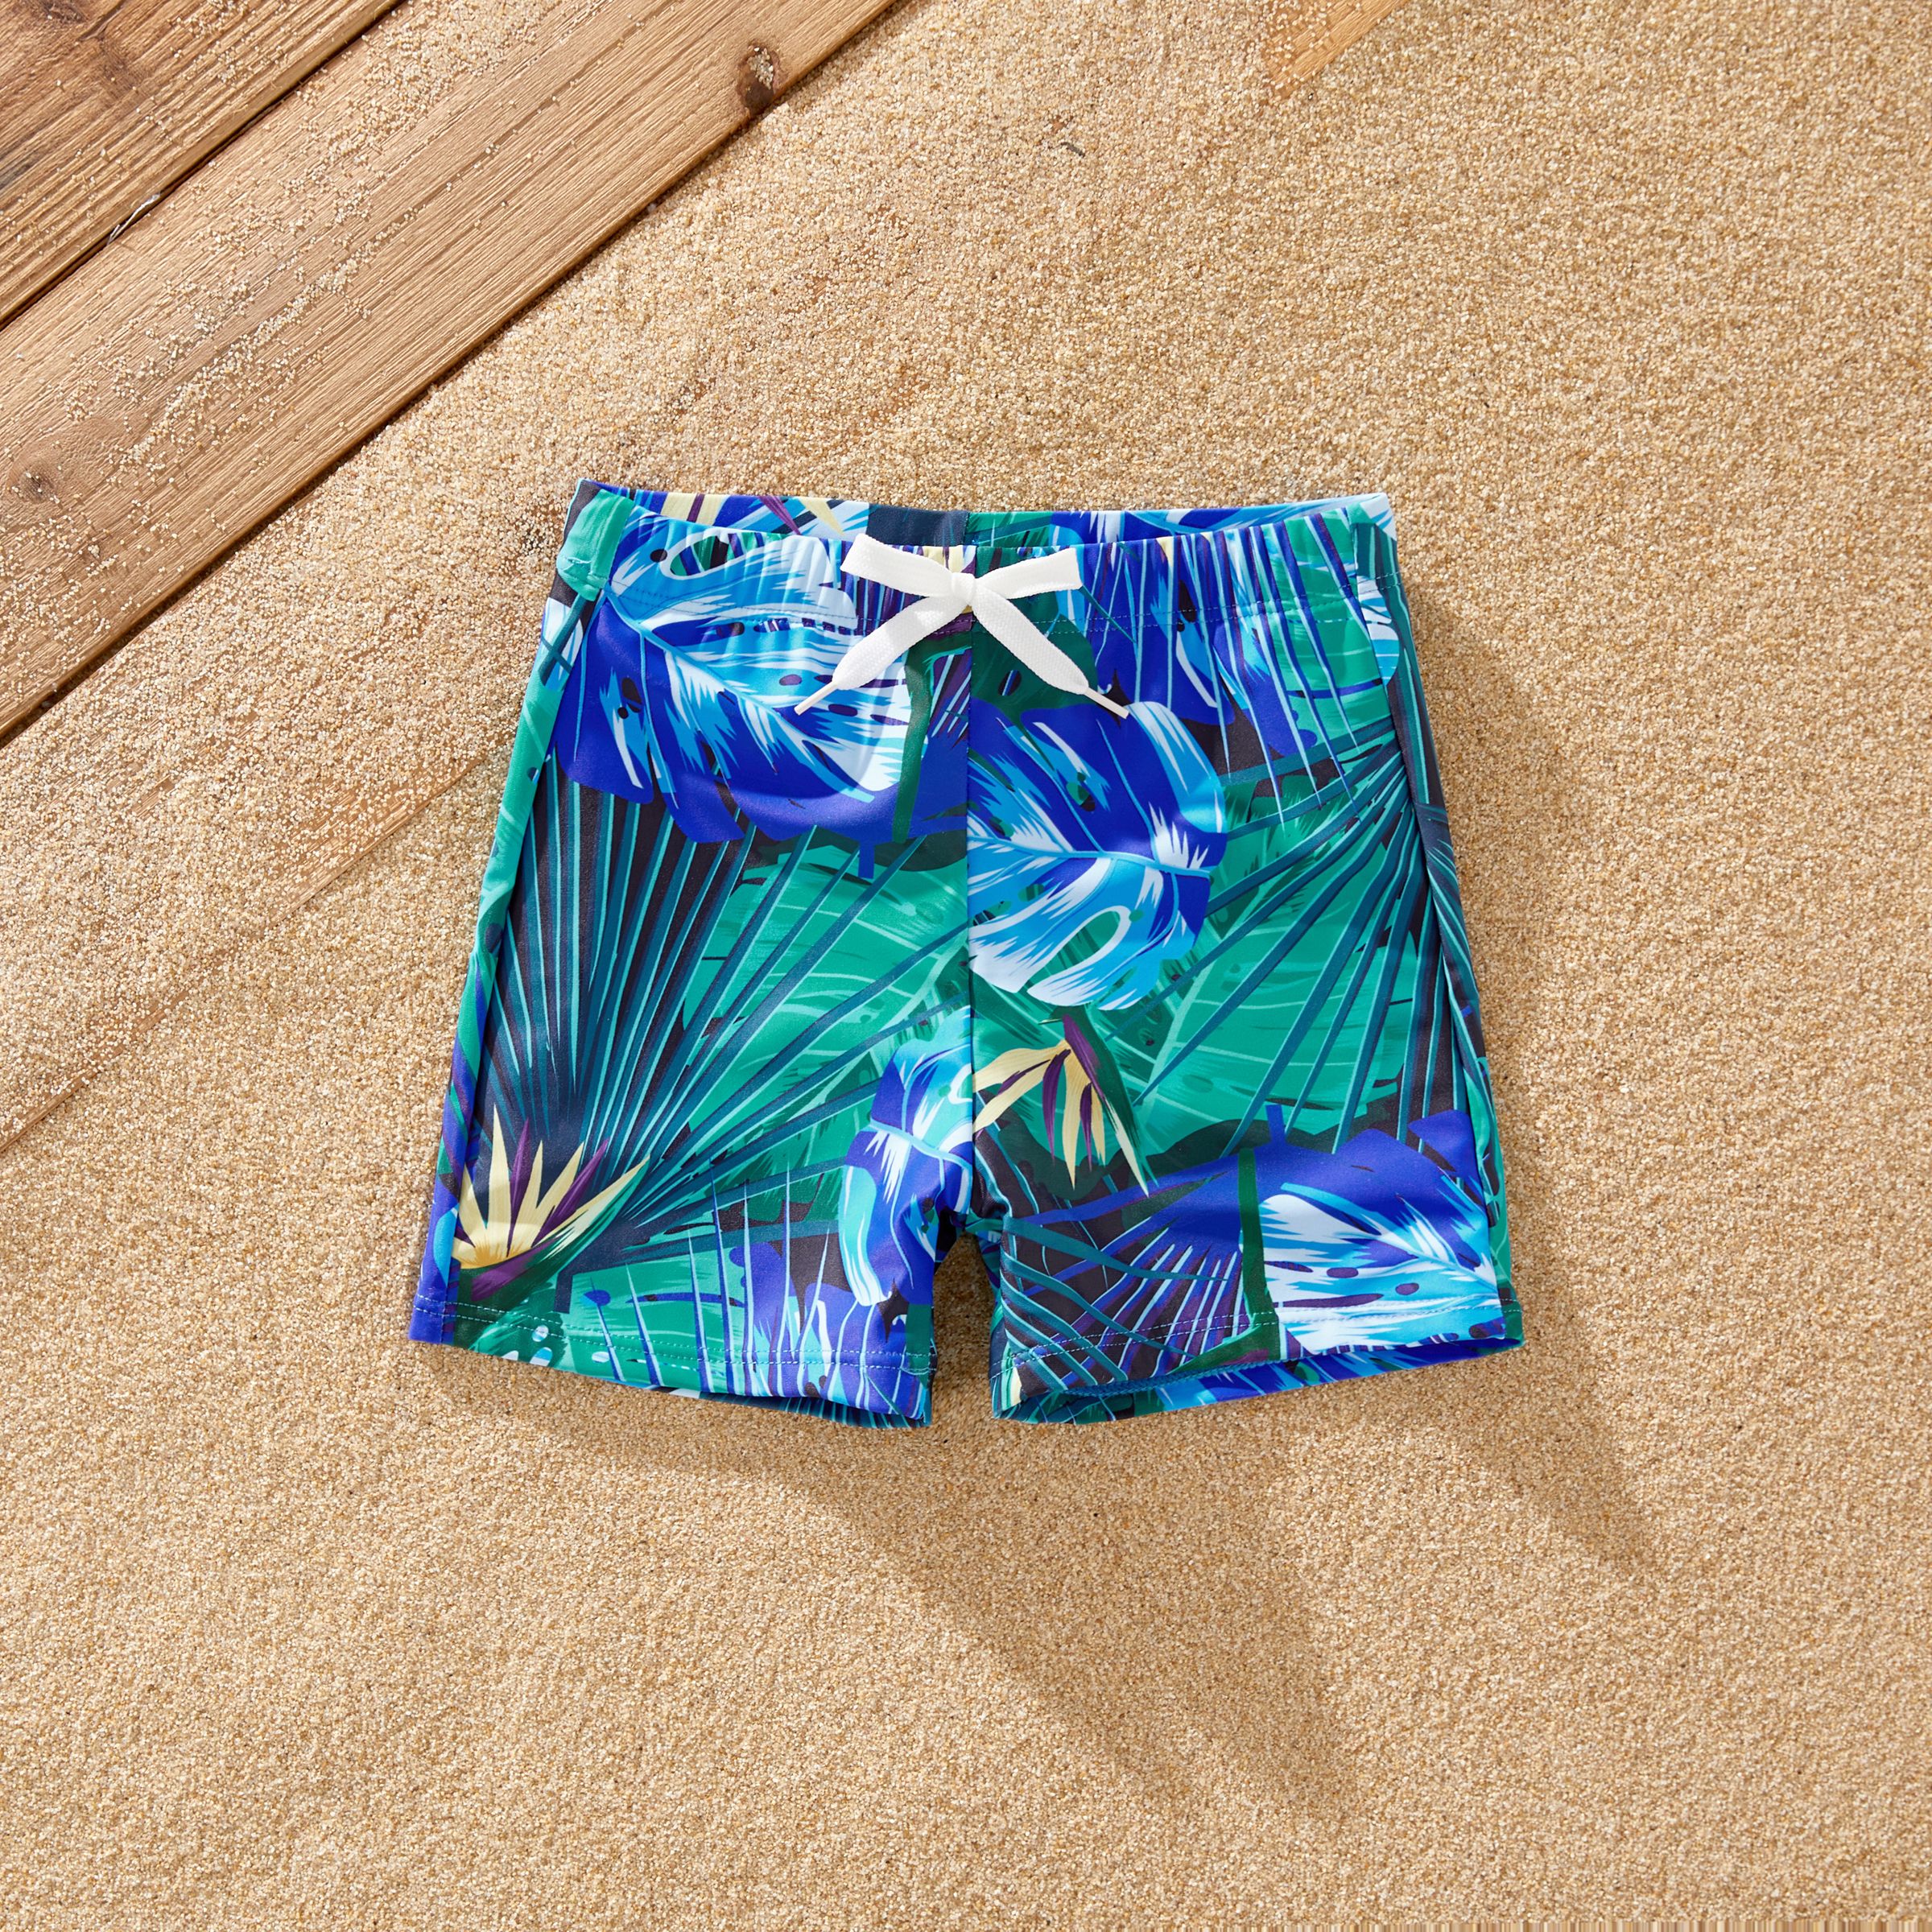 Family Matching Drawstring Swim Trunks or Crisscross Ruched One-Piece Strap Swimsuit